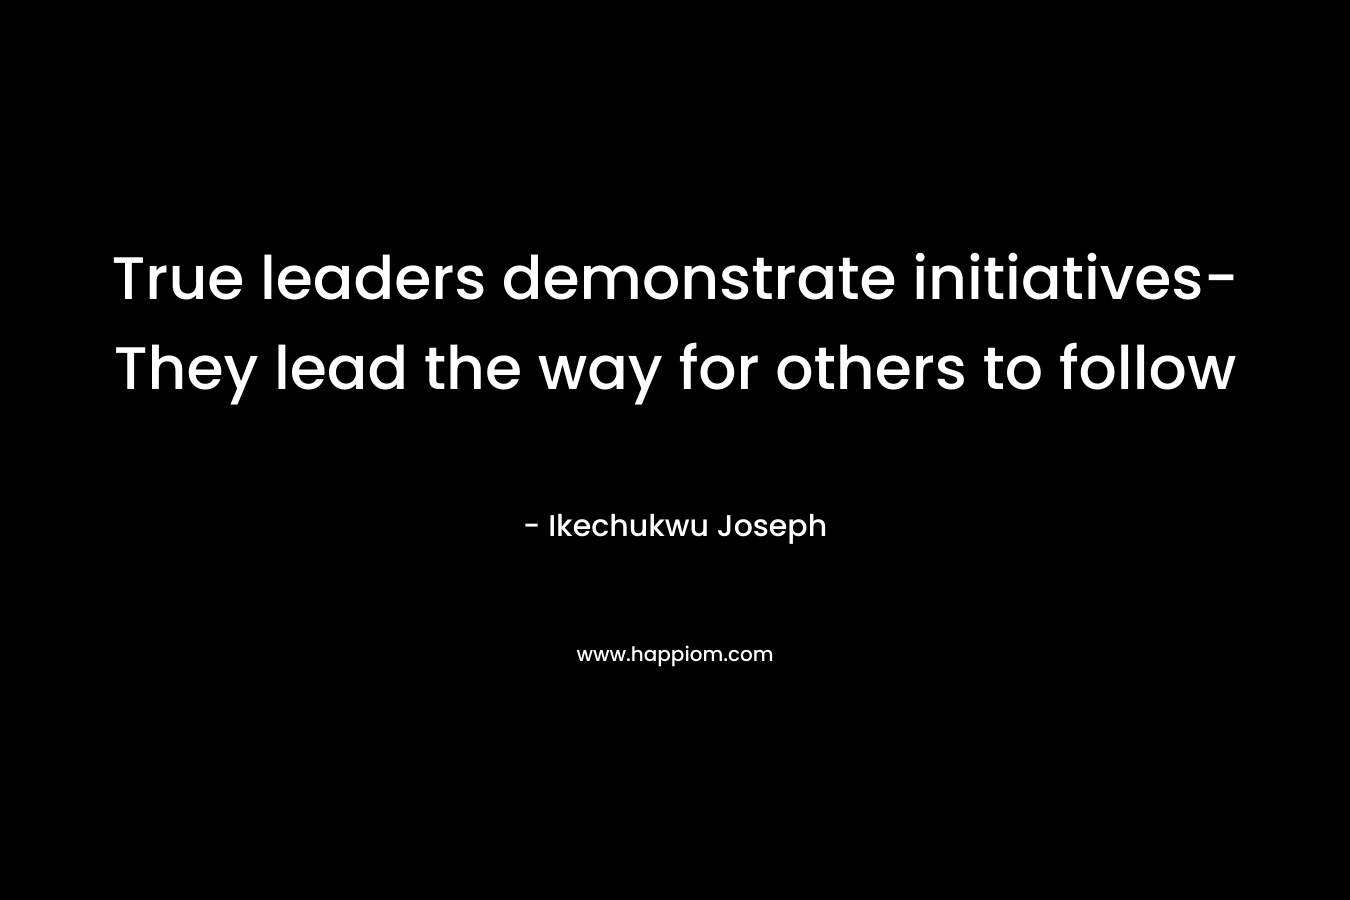 True leaders demonstrate initiatives-They lead the way for others to follow – Ikechukwu Joseph